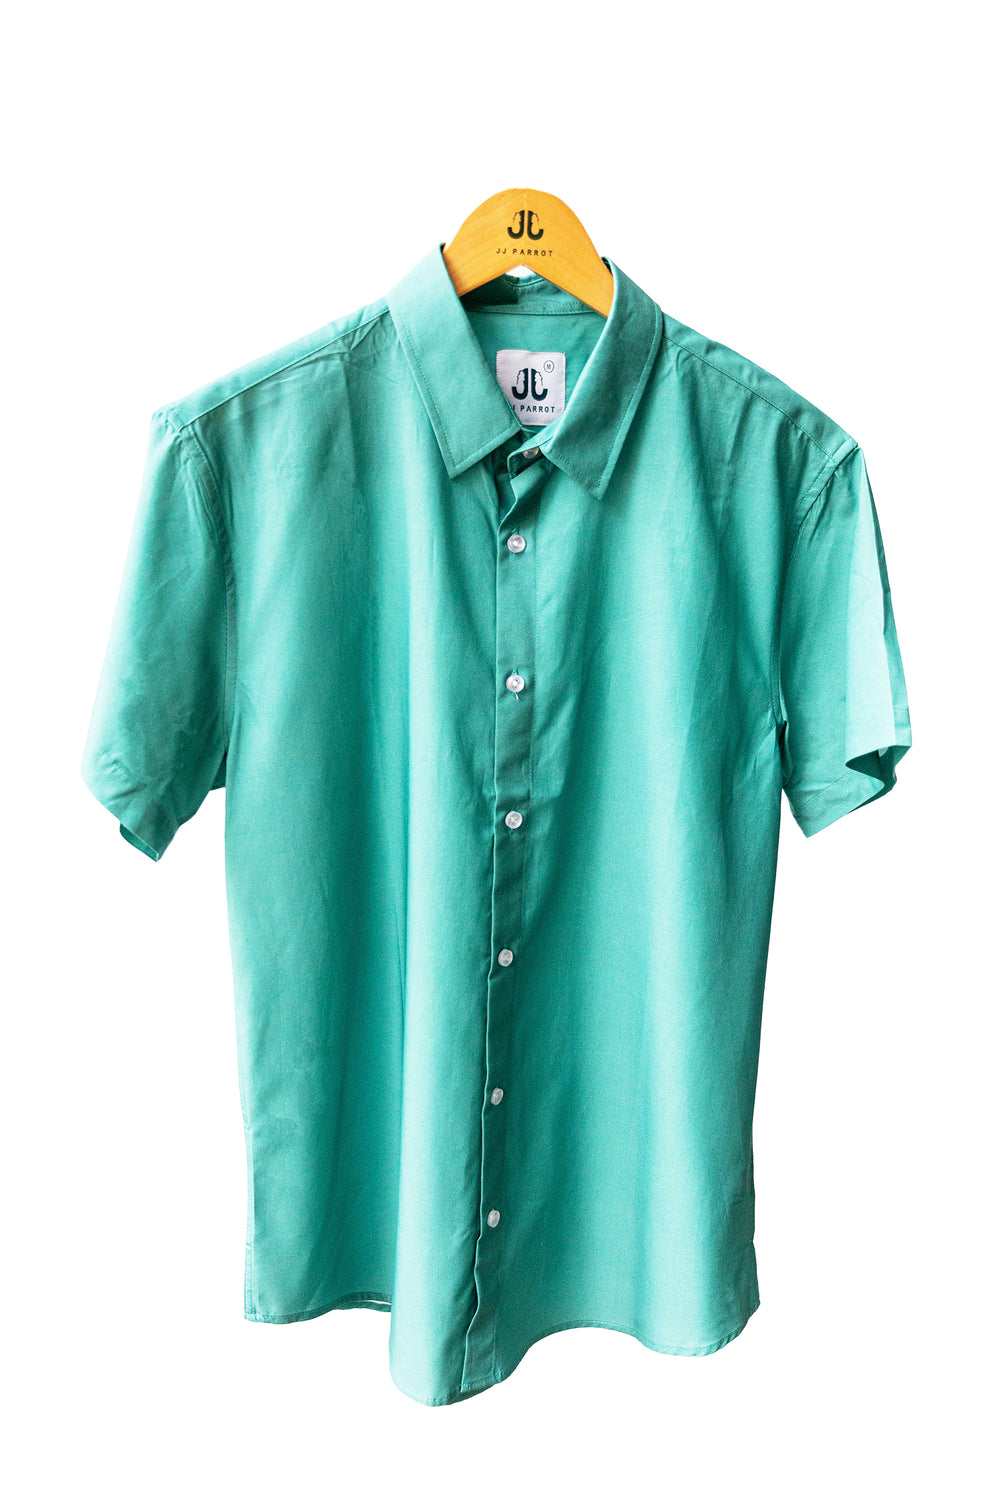 Solid Teal Short Sleeve Button Down